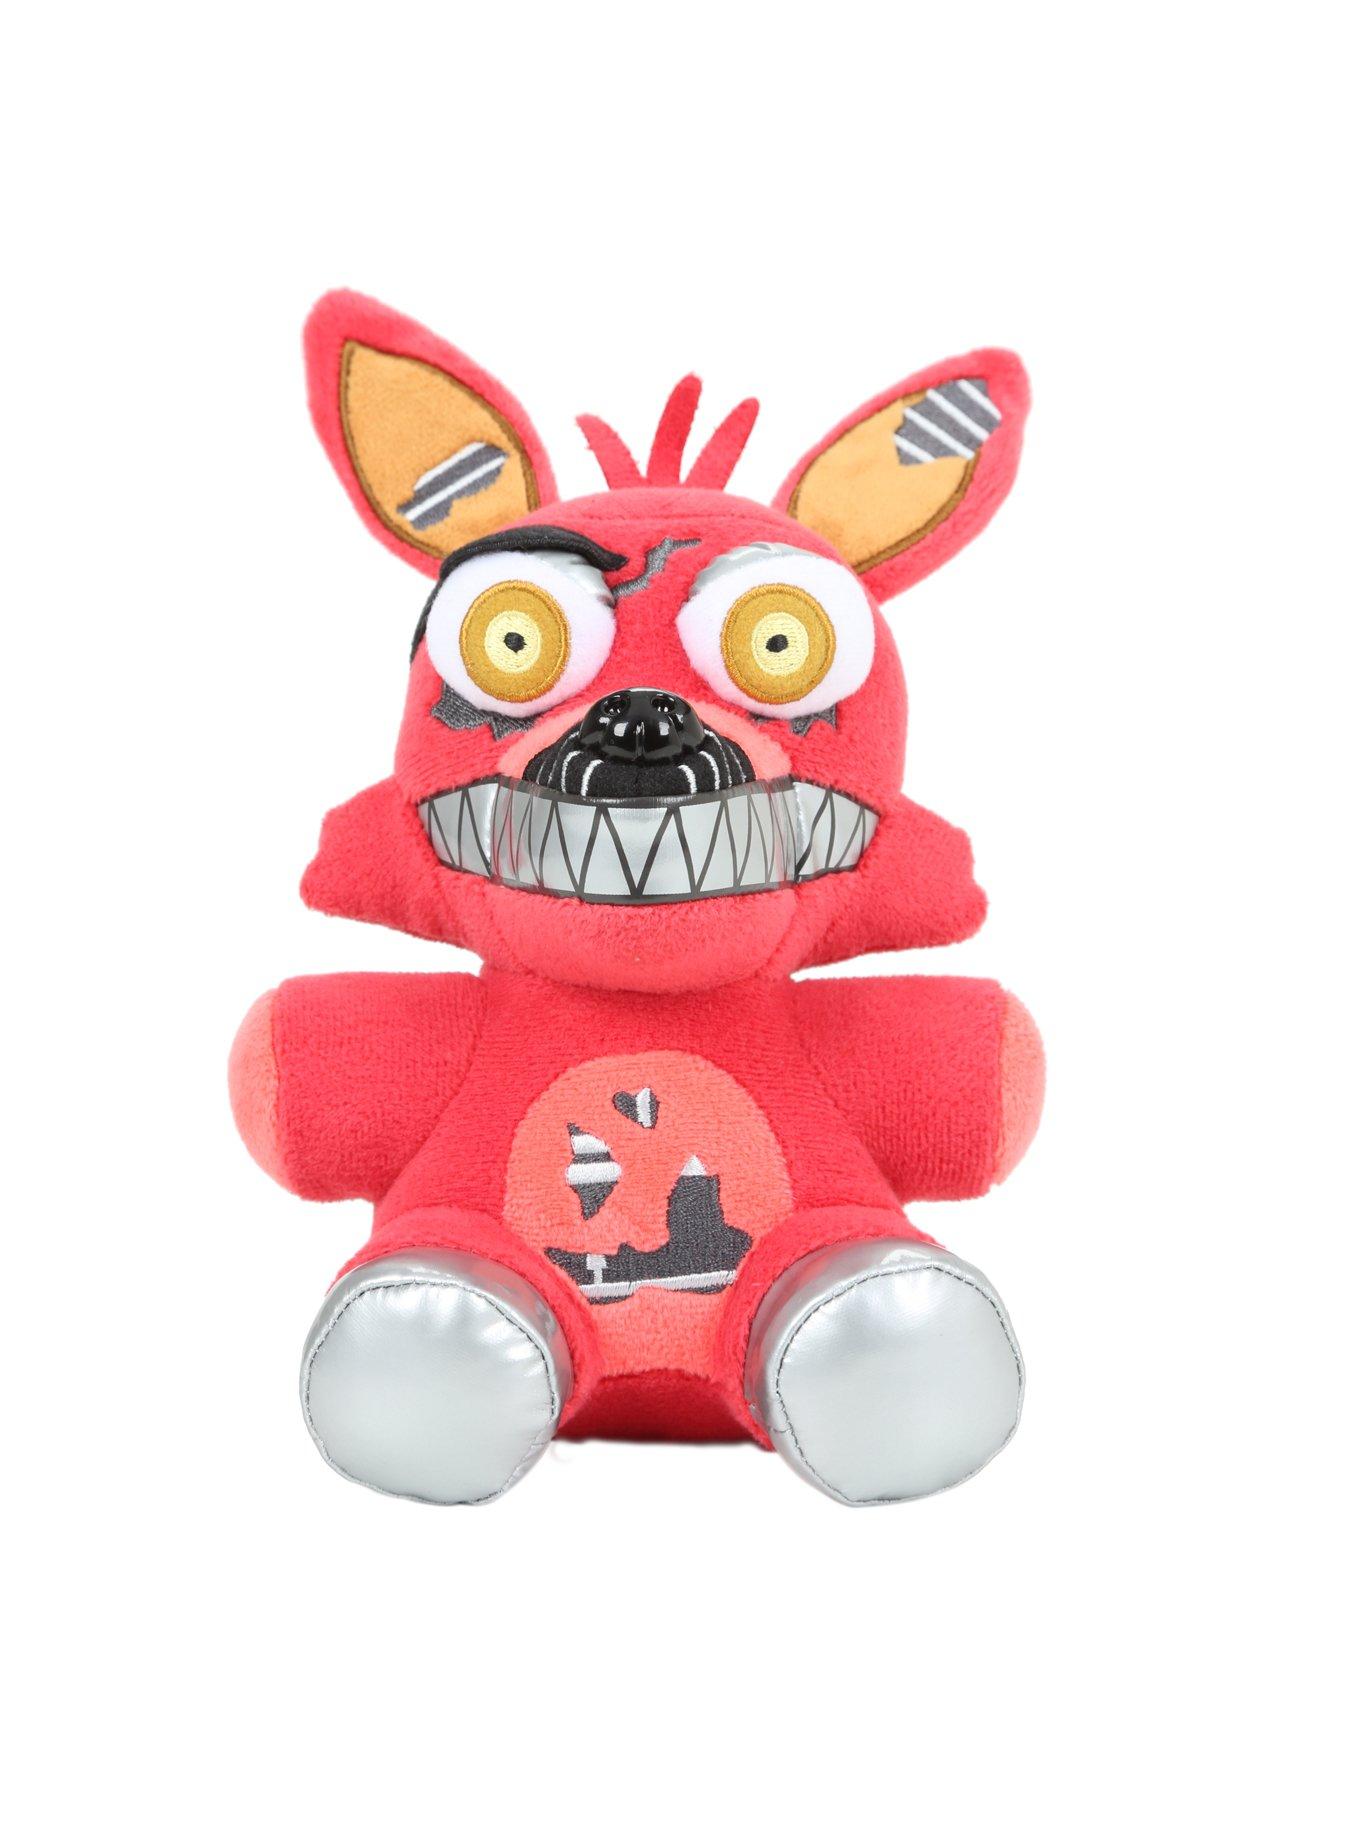 Anjinguang Five Ni-ghts At Fre-ddy's Nightmare fnaf Plush, Foxy